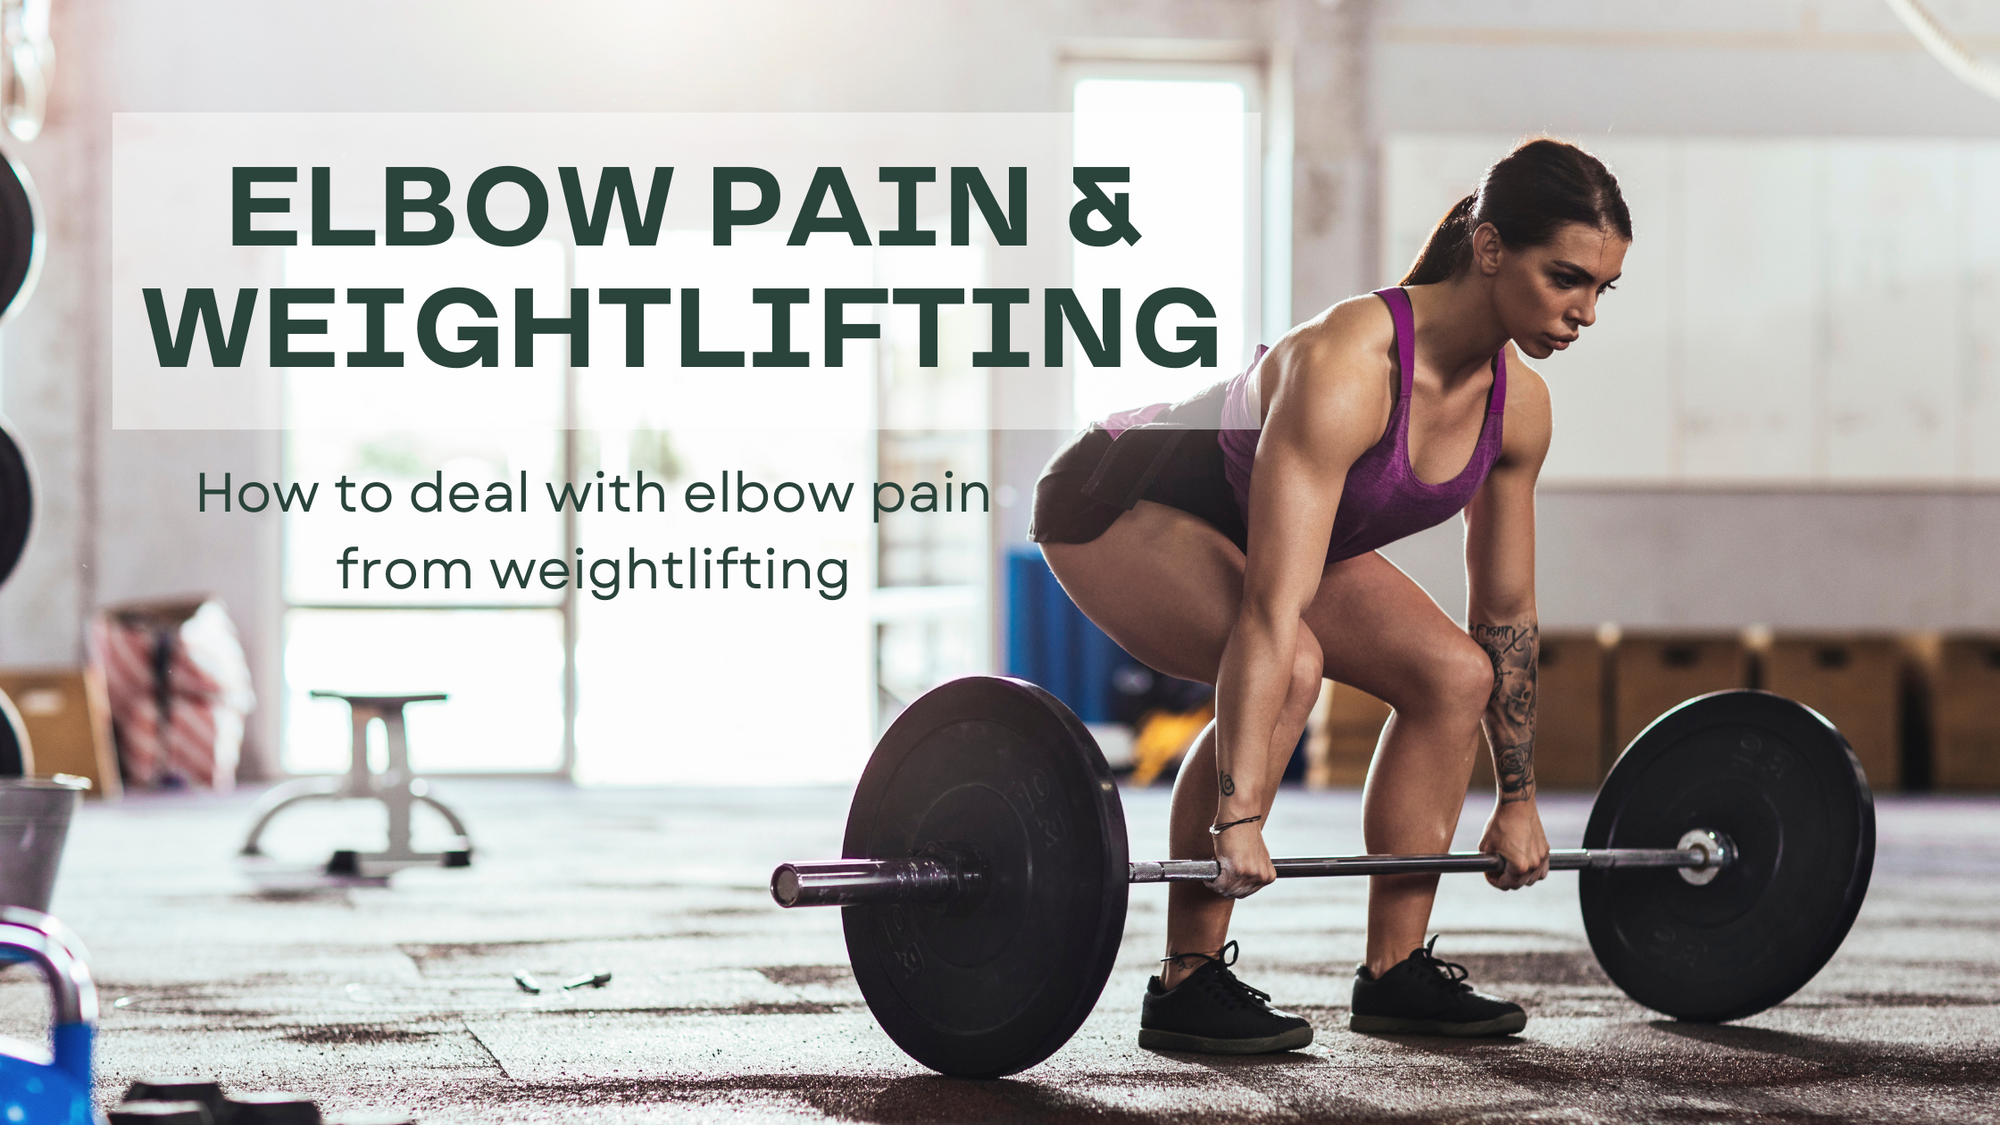 Dealing with elbow pain from weightlifting